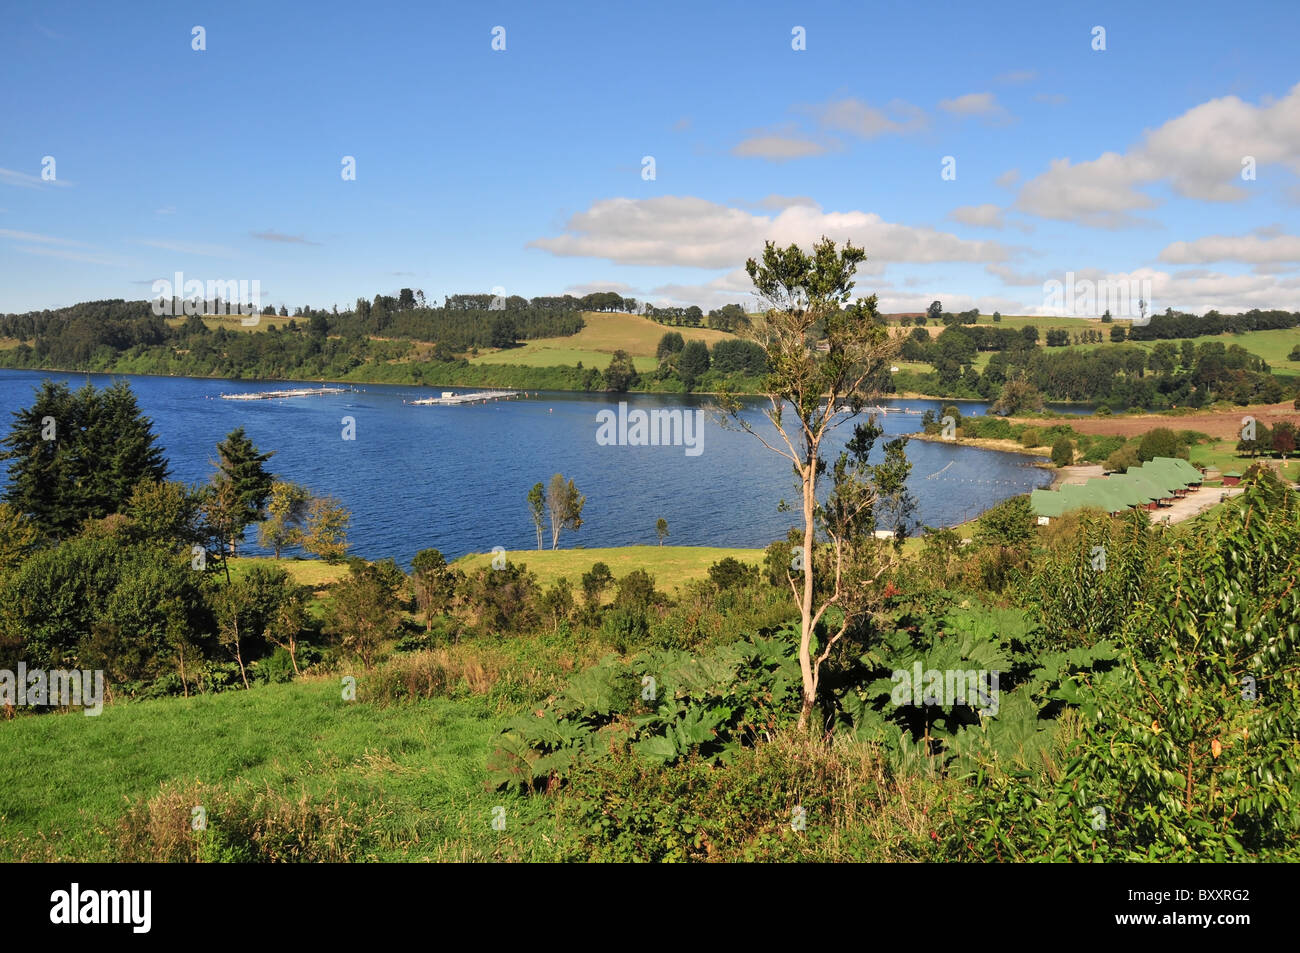 View Down A Green Slope With Grass Trees And Gunnera Plants Of Fish Farm Salmon Cages Lake Llanquihue Bay Frutillar Chile Stock Photo Alamy